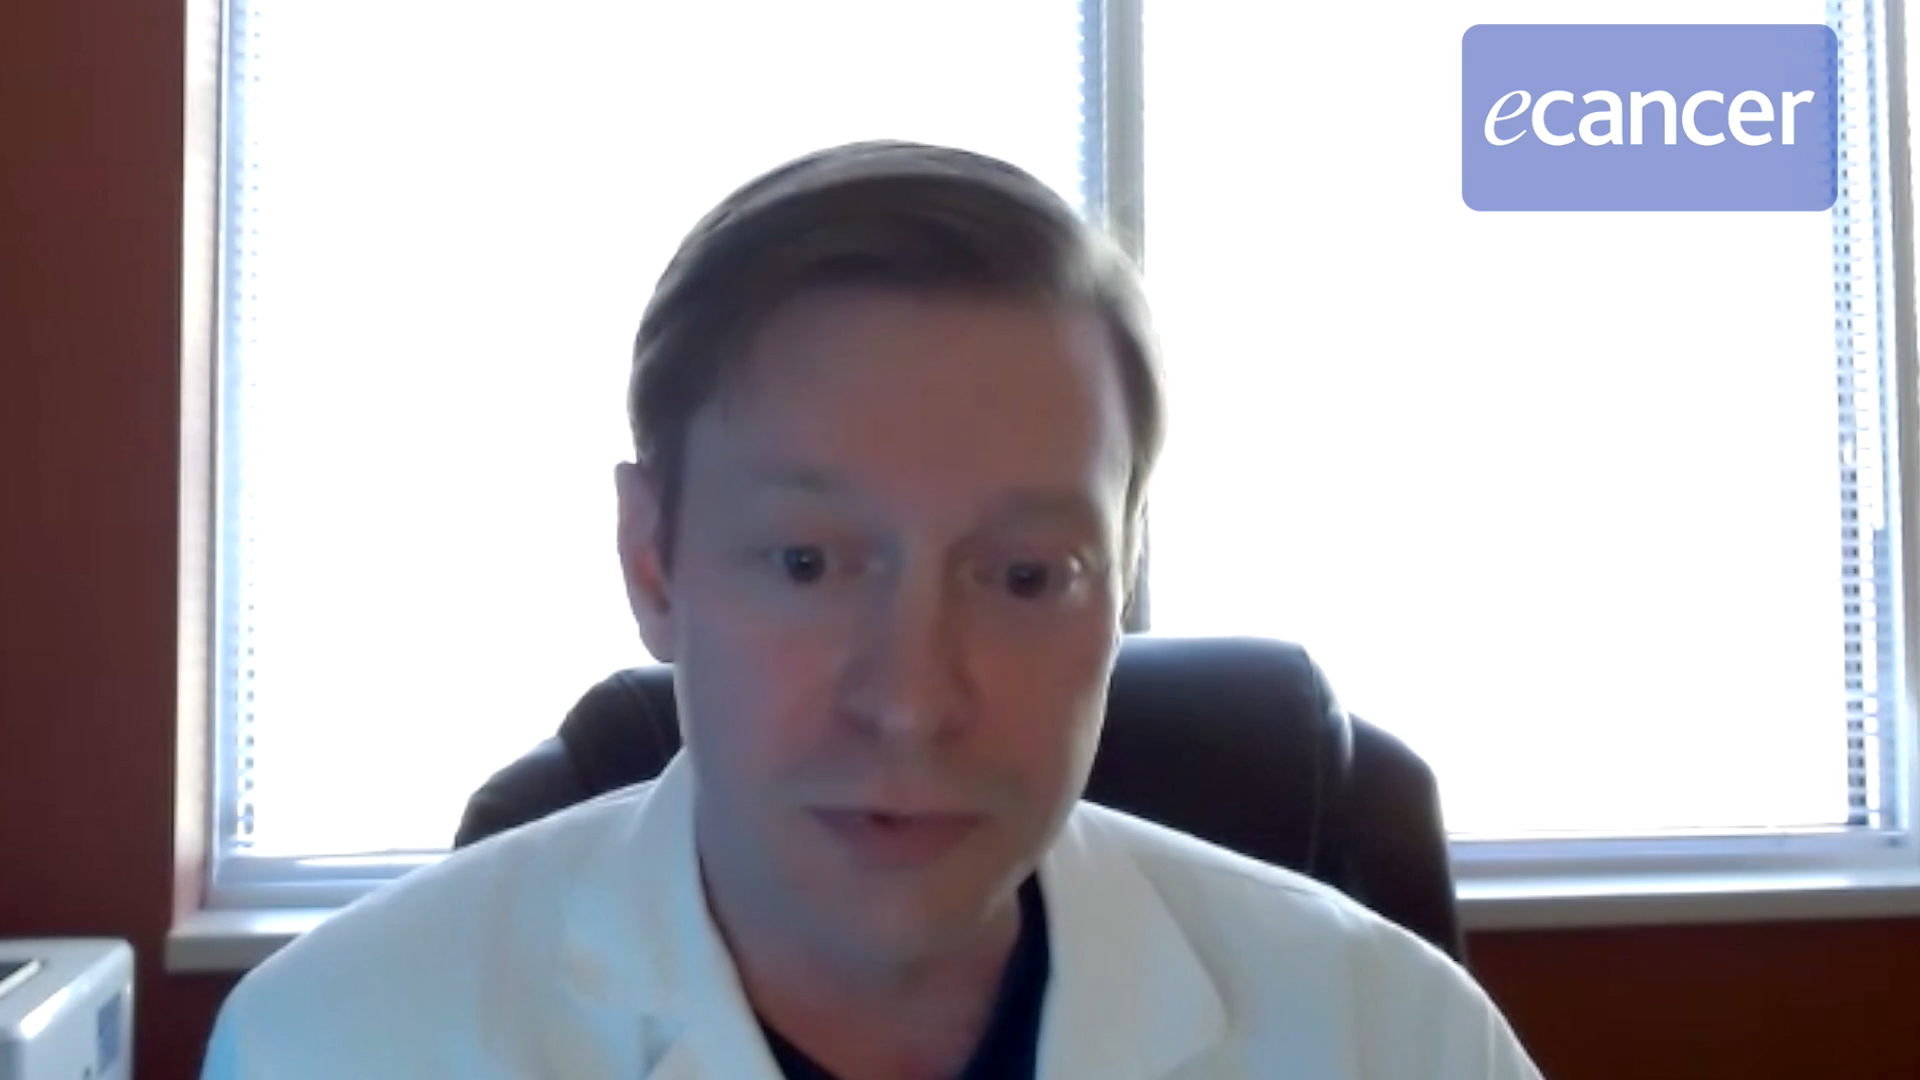 How Should We Manage Patients with Acute Lymphoblastic Leukemia During COVID-19?